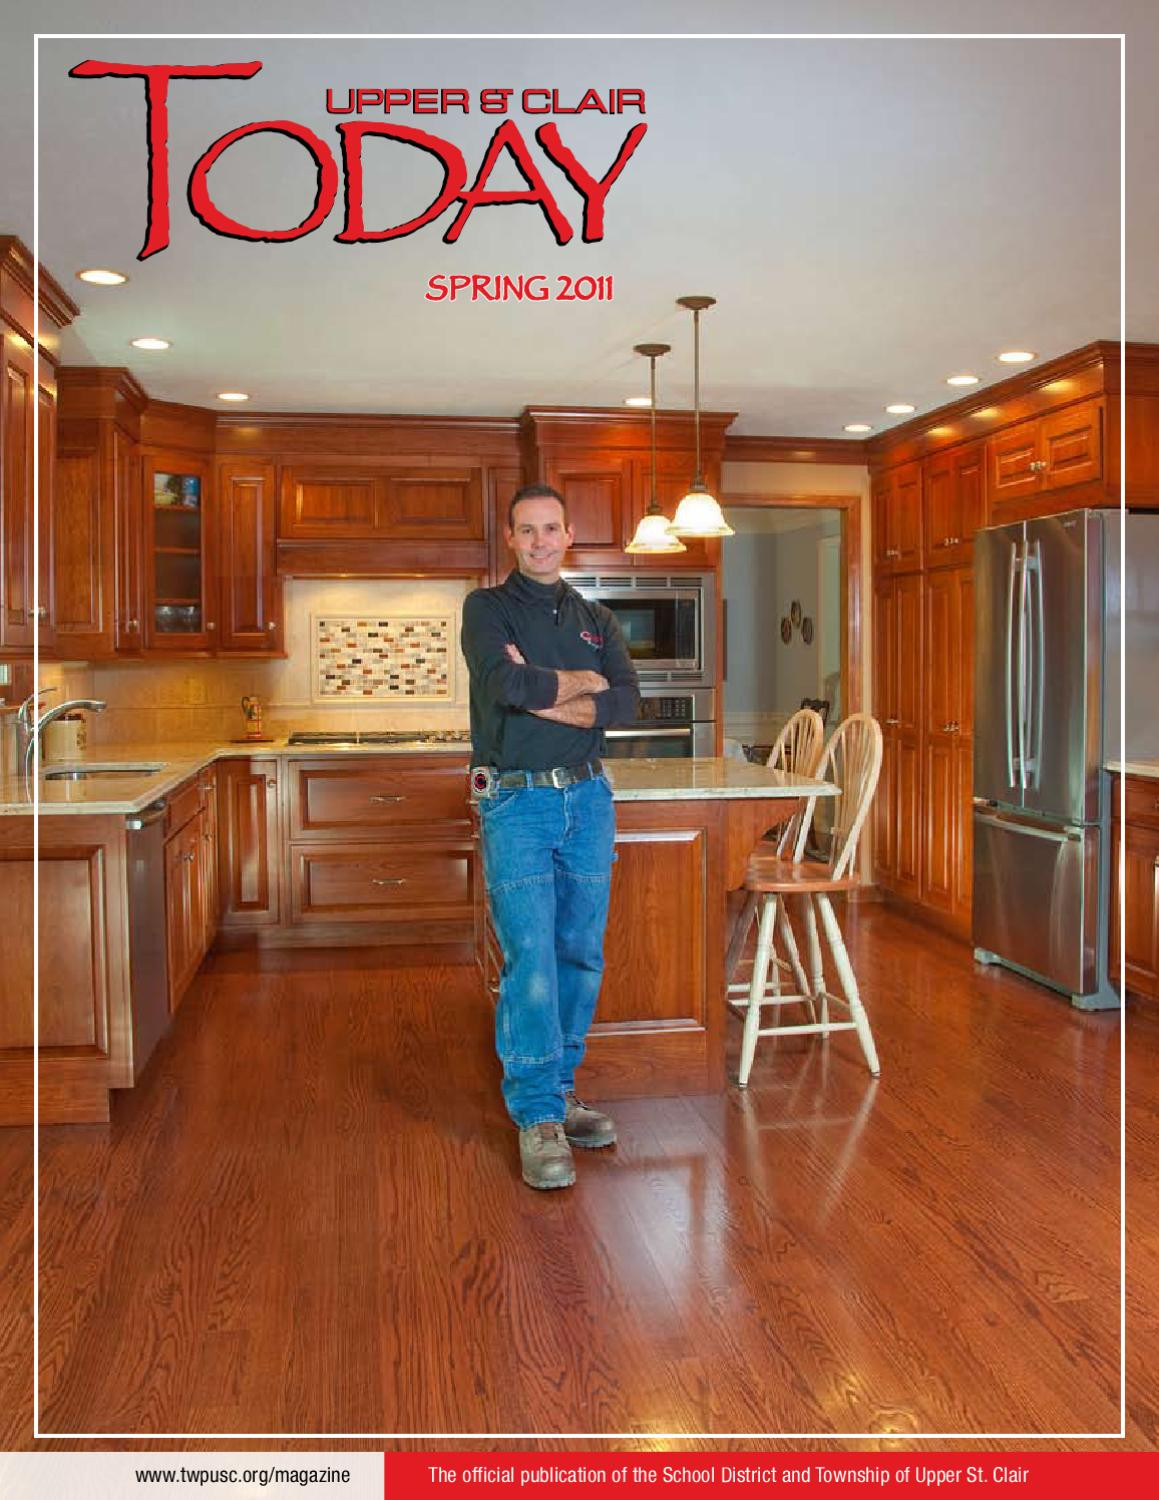 engineered hardwood flooring barrie of spring 2011 by upper st clair today magazine issuu within page 1